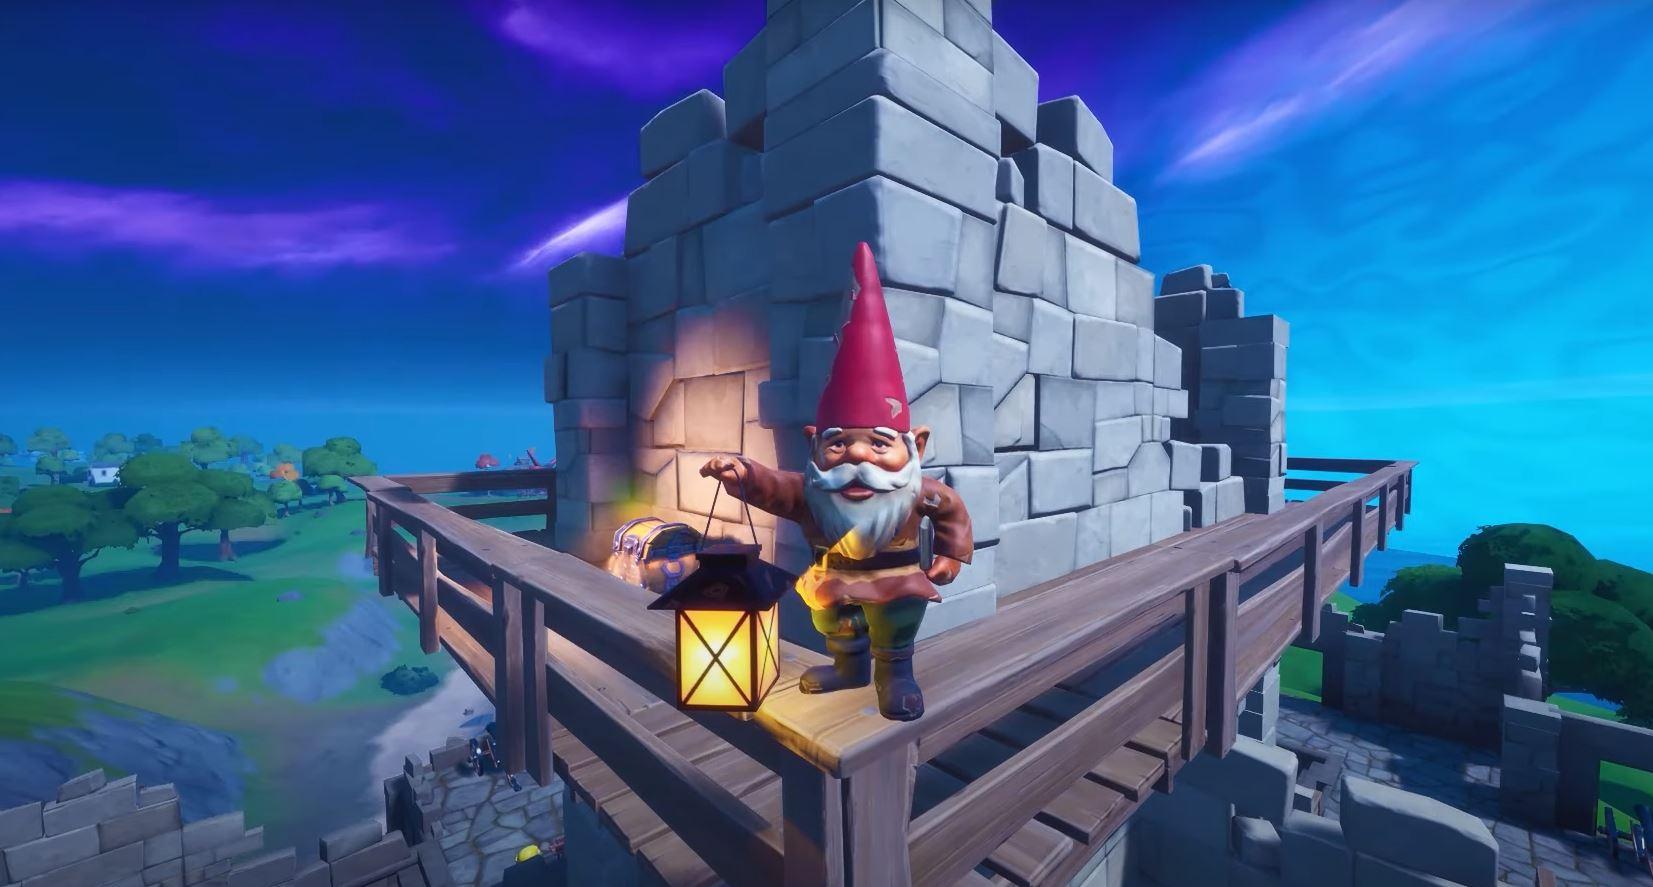 Gnome on the Fortnite map holding a lantern